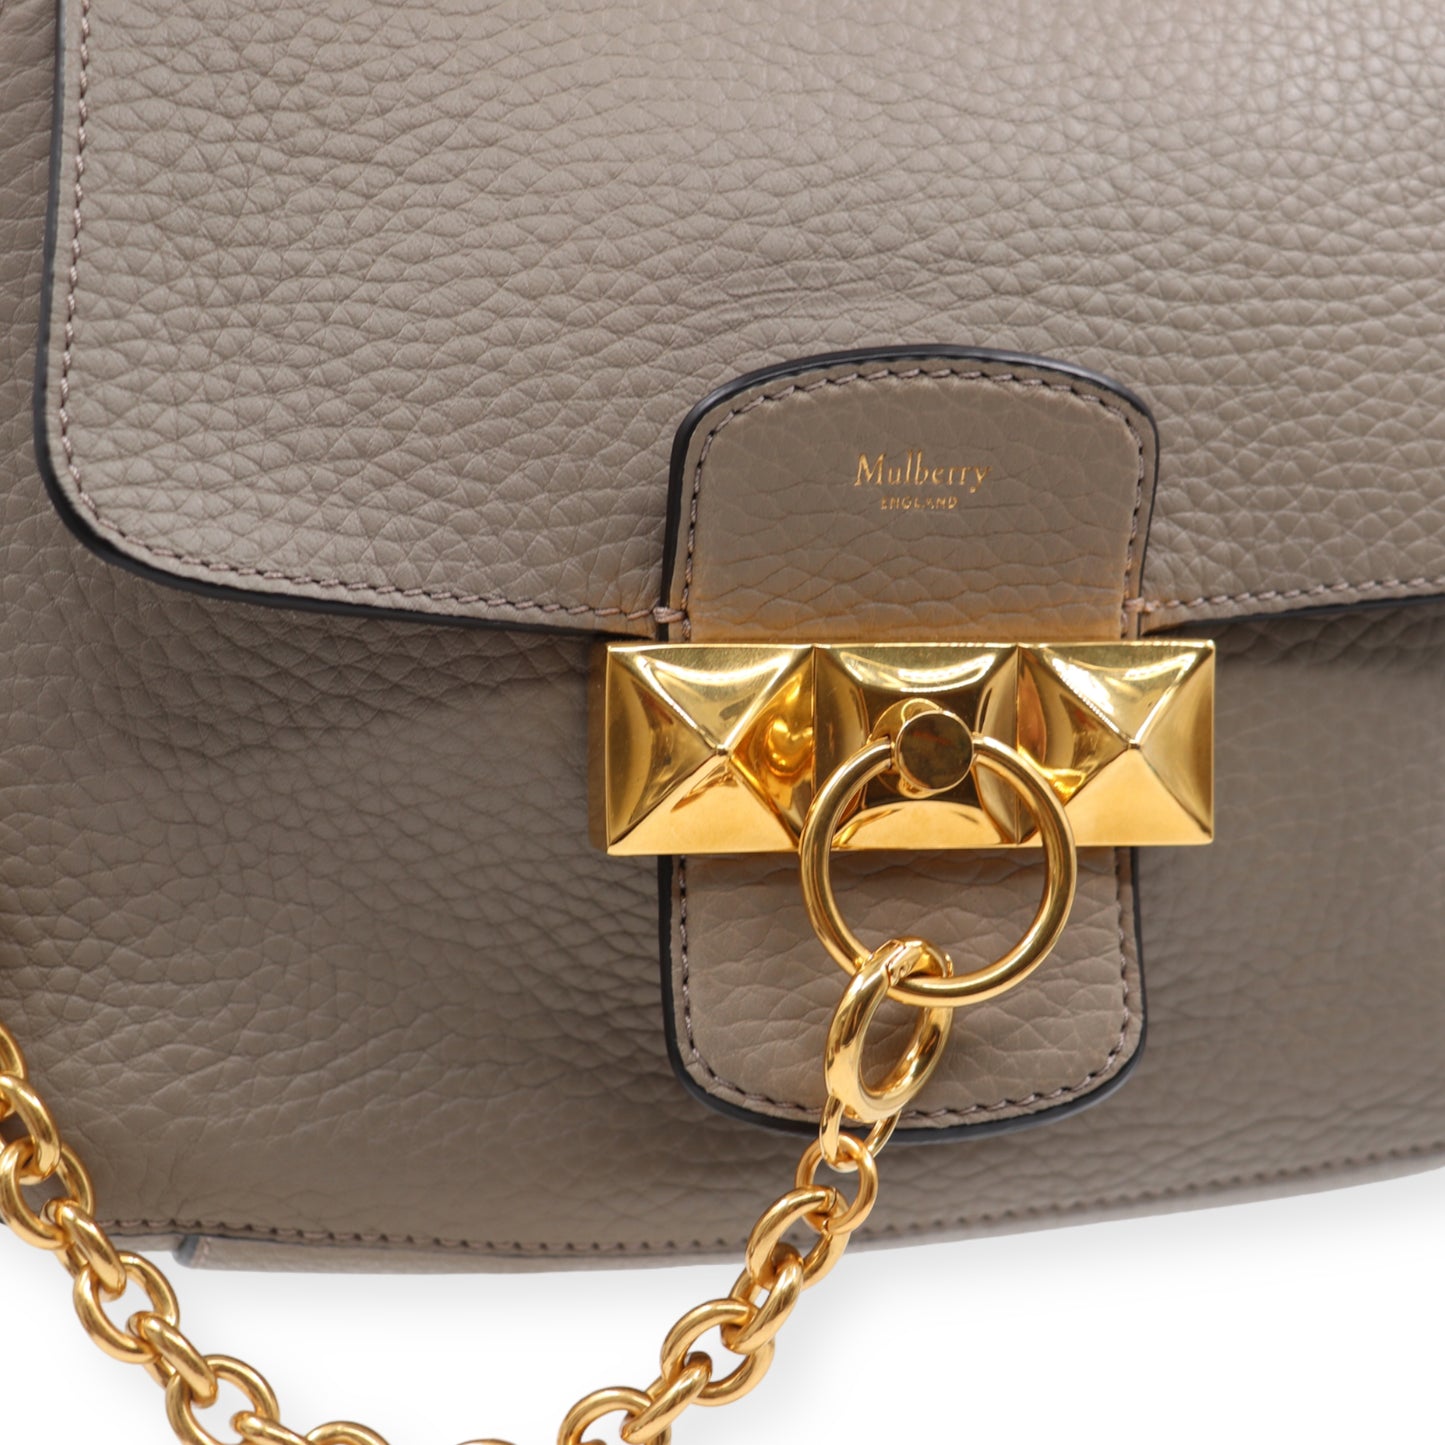 Mulberry Mini Keeley taupe